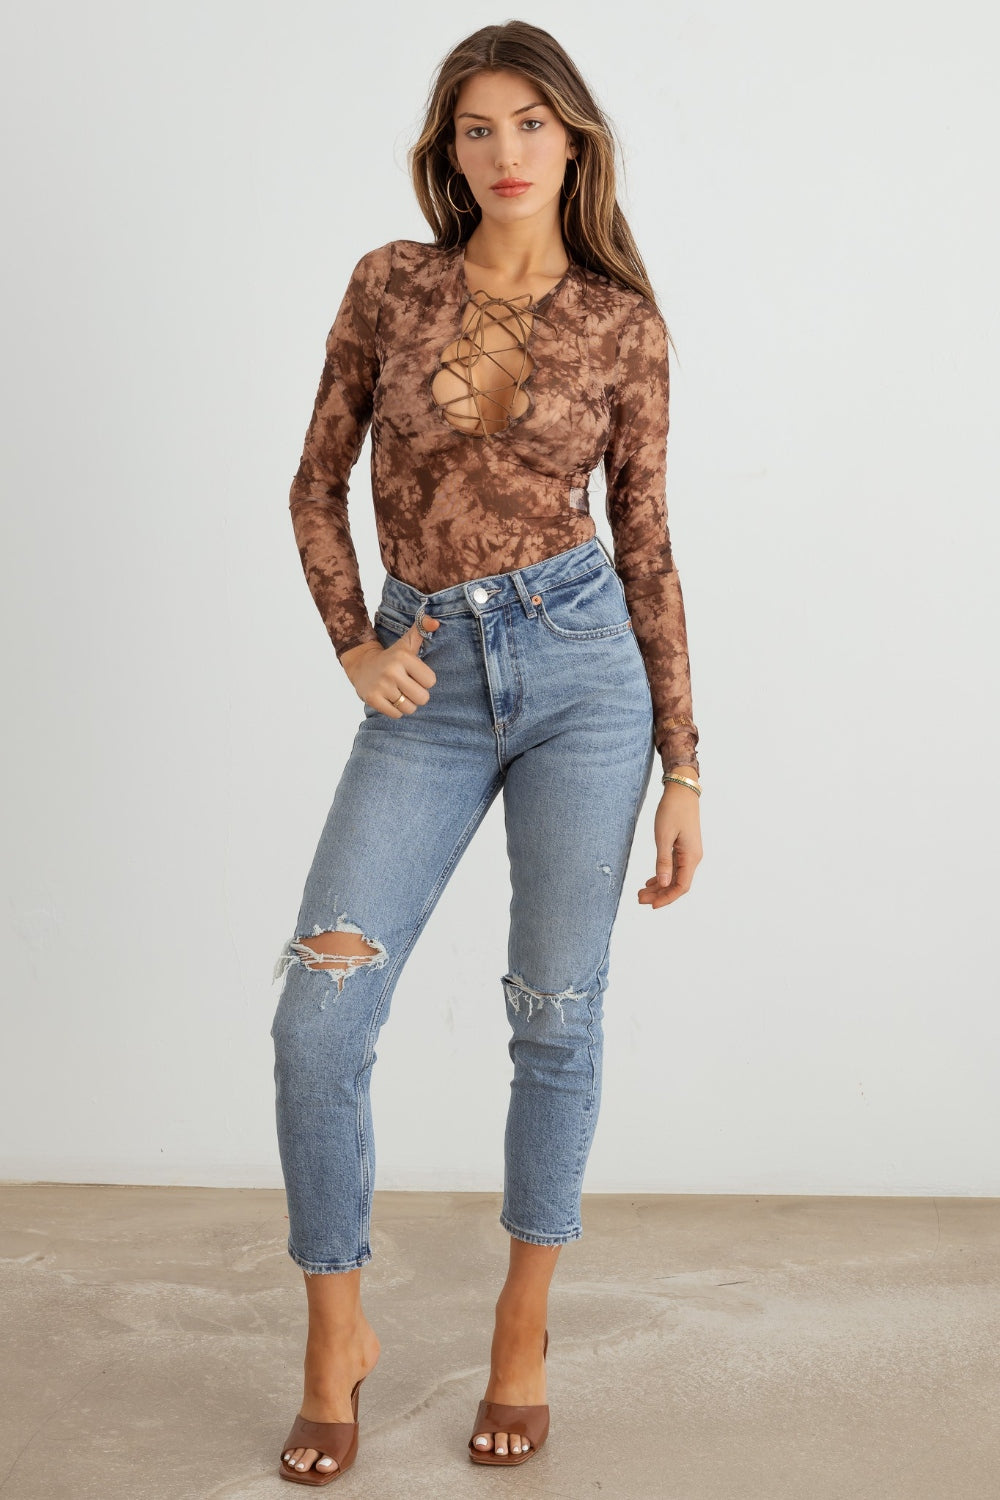 HERA COLLECTION Abstract Mesh Lace-Up Long Sleeve Bodysuit - Thandynie